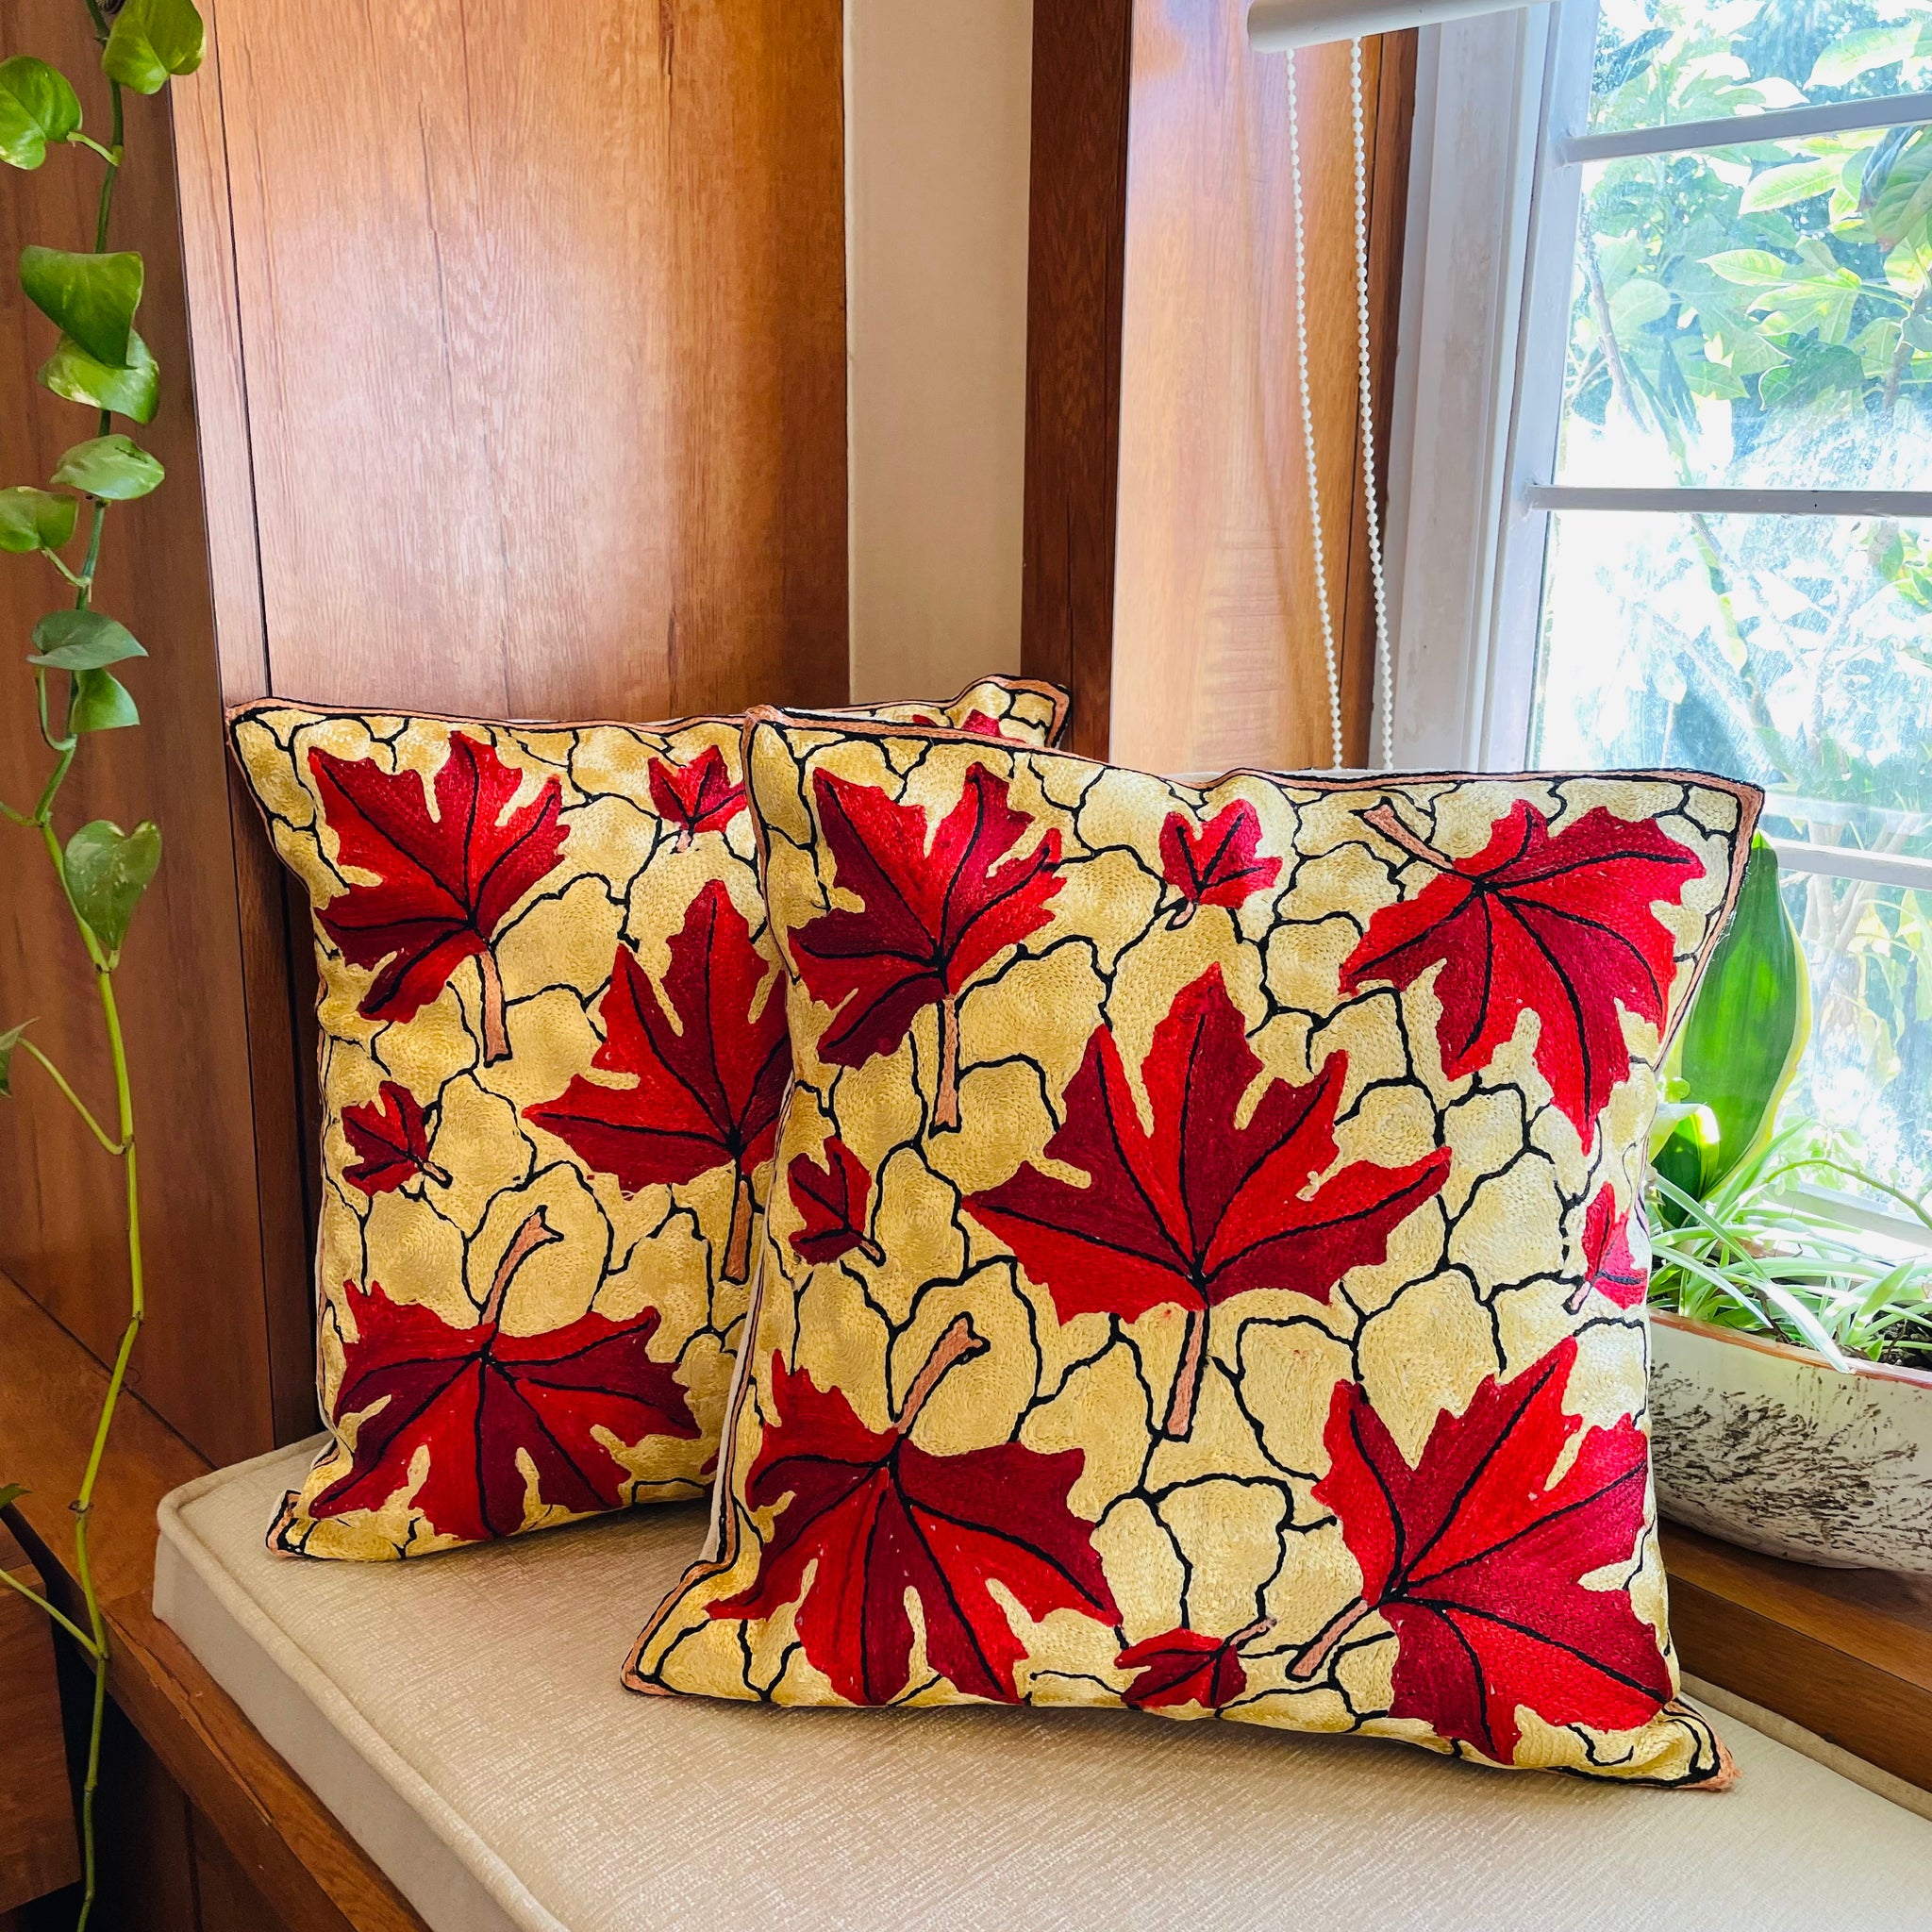 Maple Leaf Chainstitch Embroidered Cushion Cover - Red and Cream